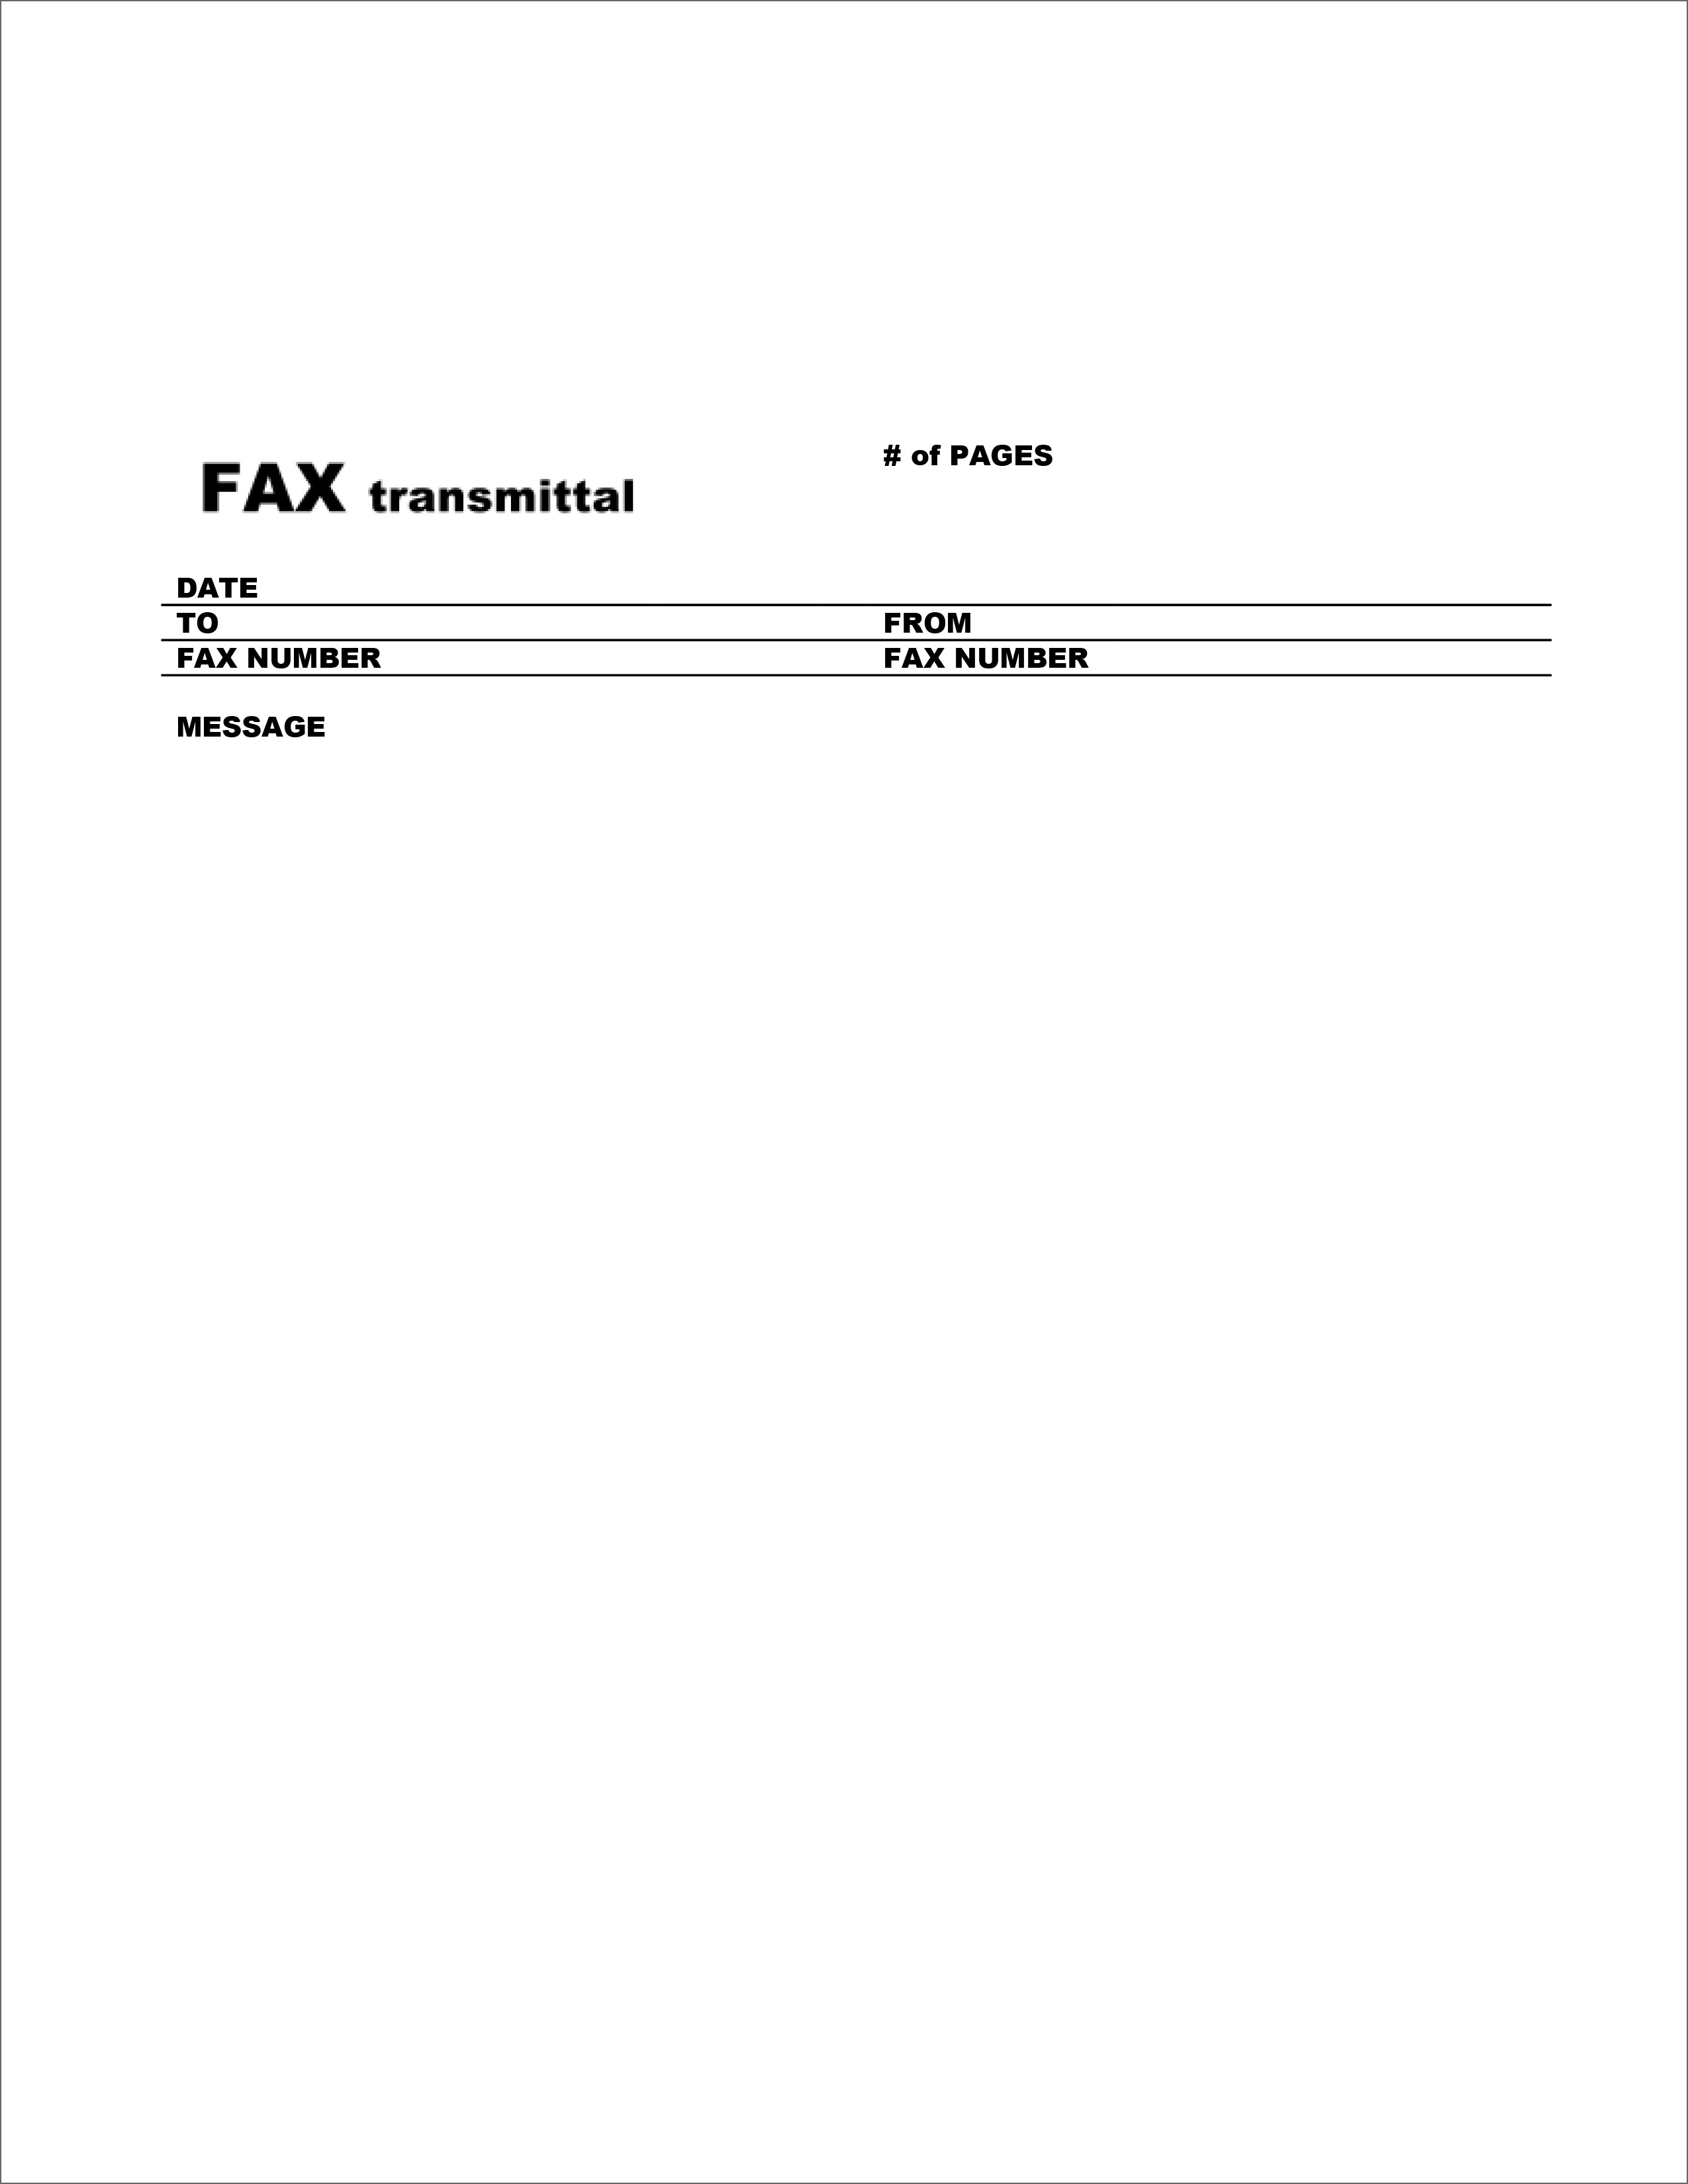 fax-template-cover-sheet